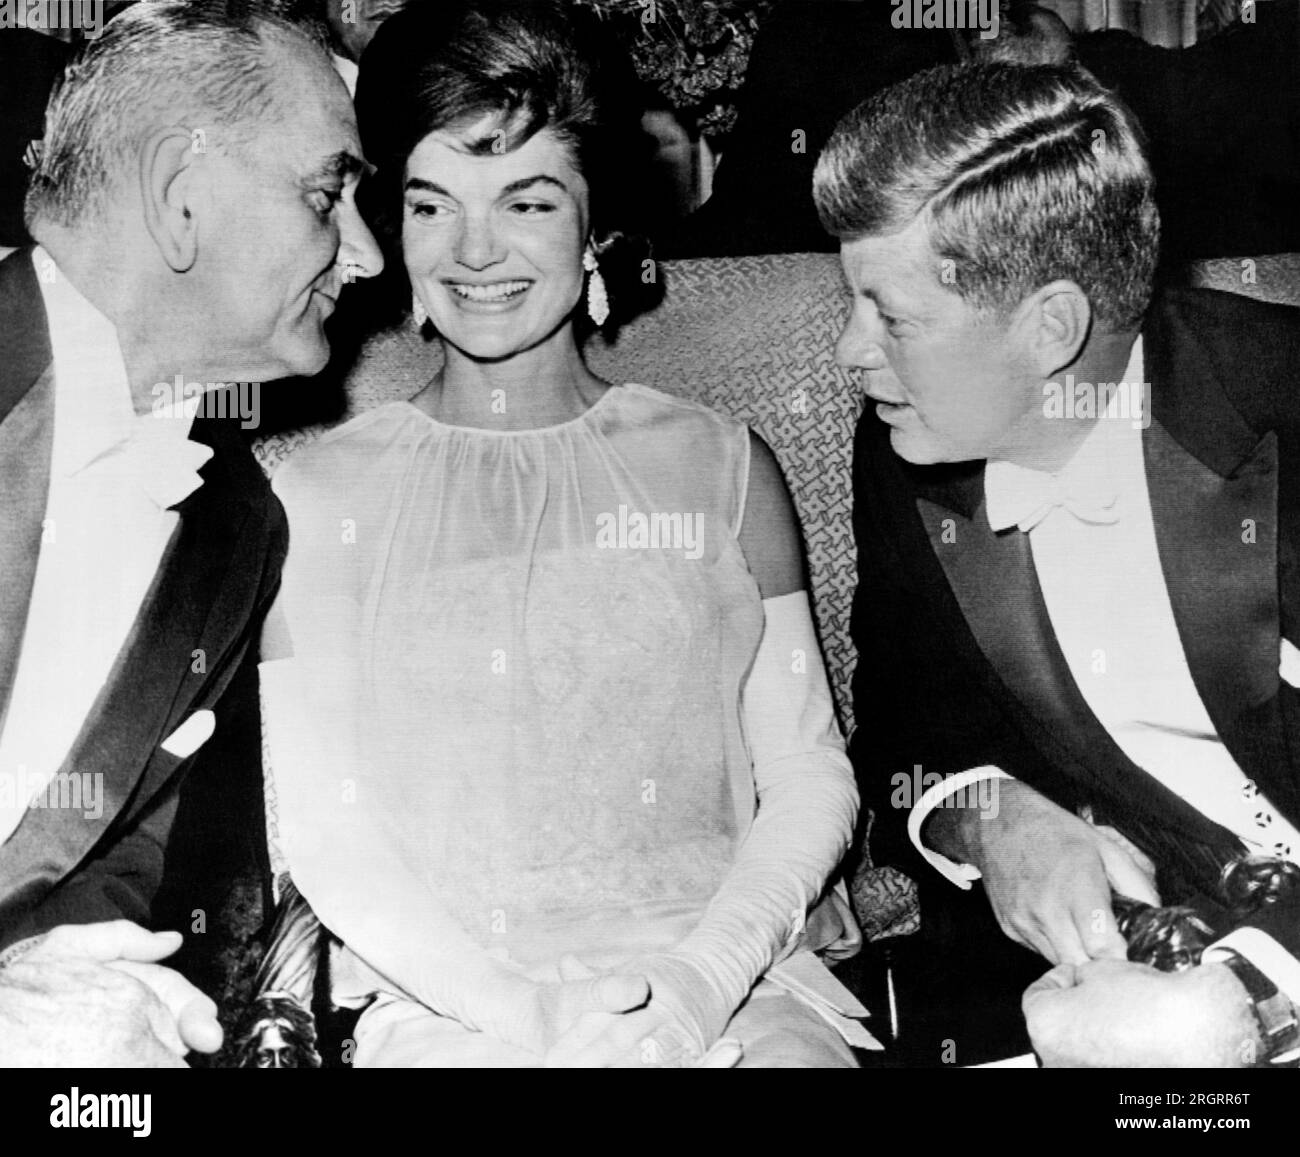 Washington, D.C.:   February 2, 1961 Vice President Lyndon Johnson leans over Jacqueline Kennedy to listen to President John Kennedy at the inaugural ball after their election to office. Stock Photo